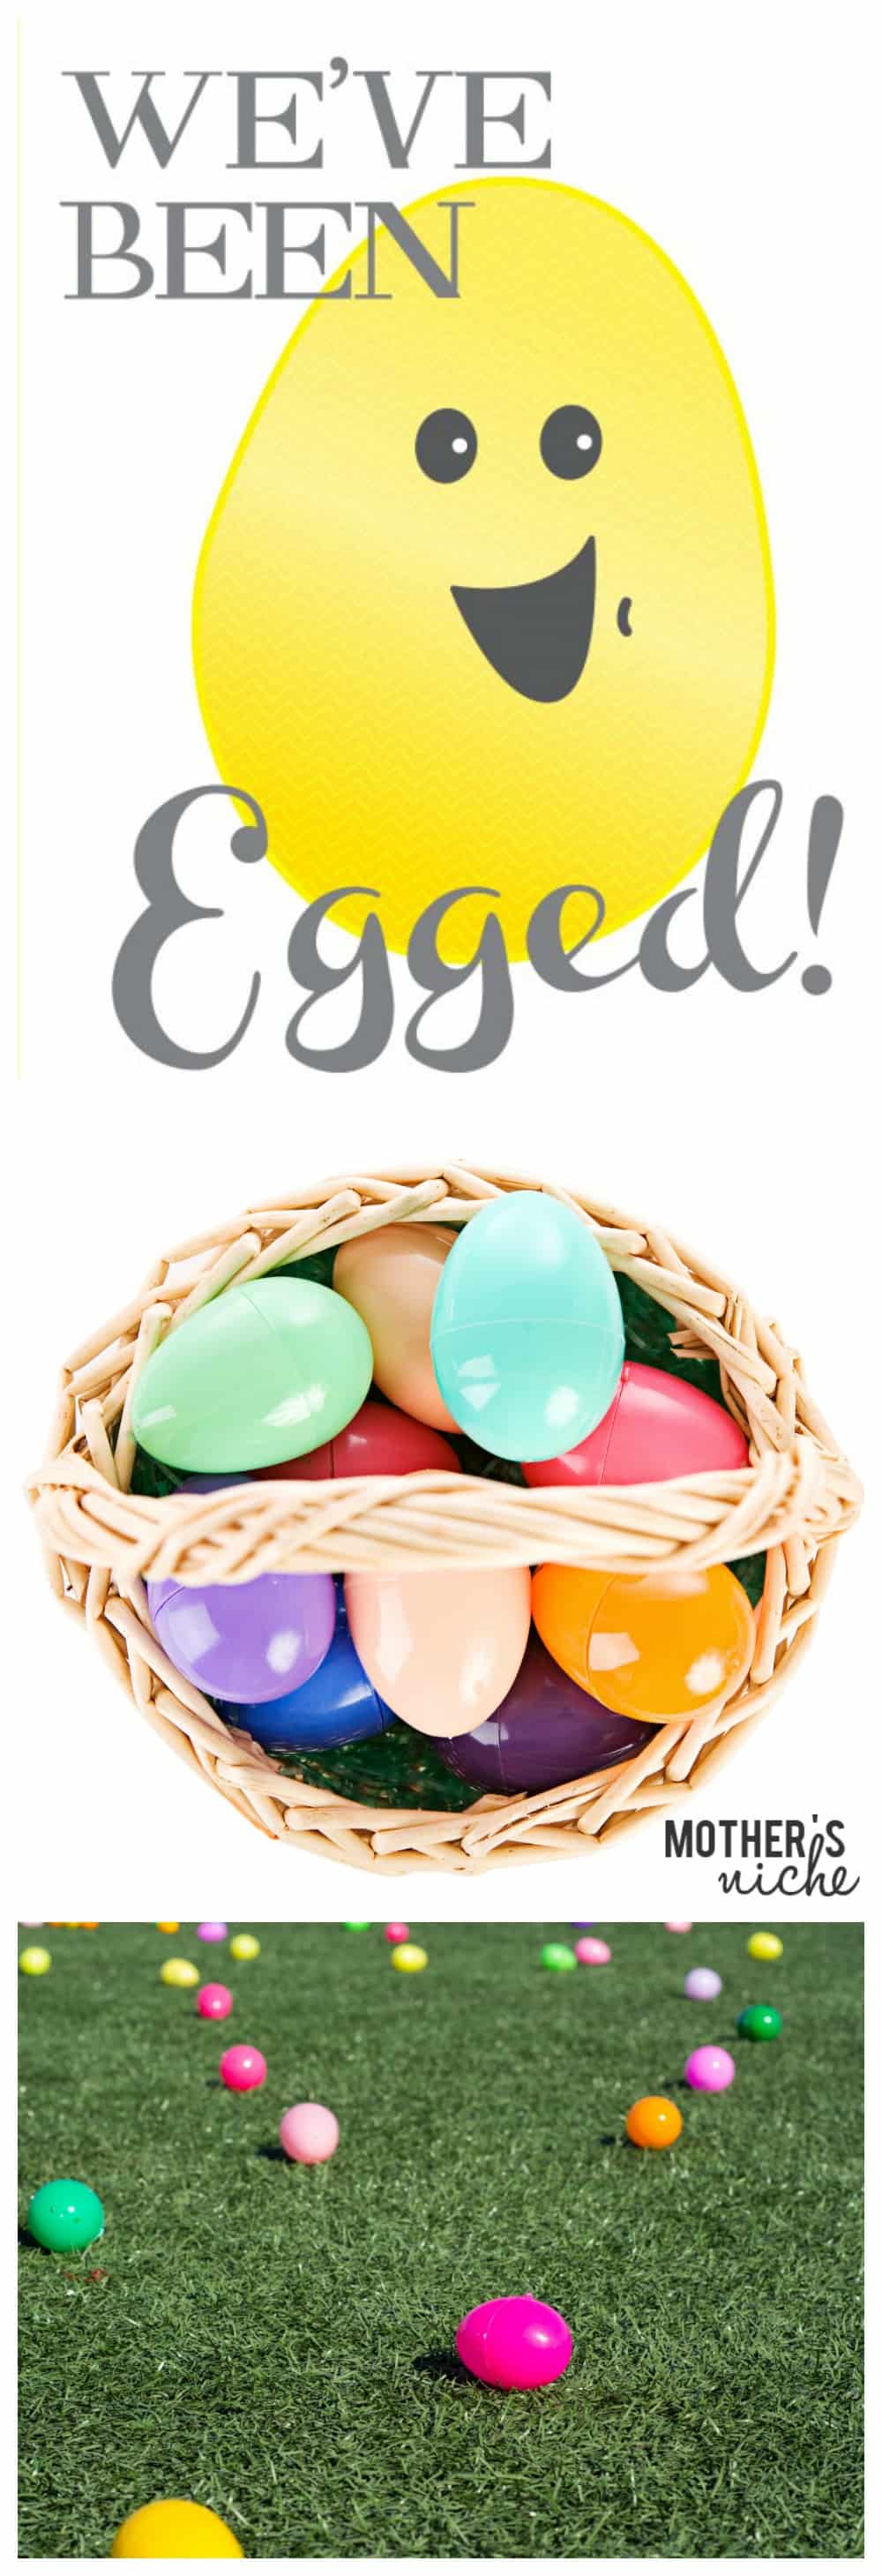 "You've Been Egged!" Printable. Such a fun way to celebrate the Easter season with your neighbors, or bring cheer to someone that needs it